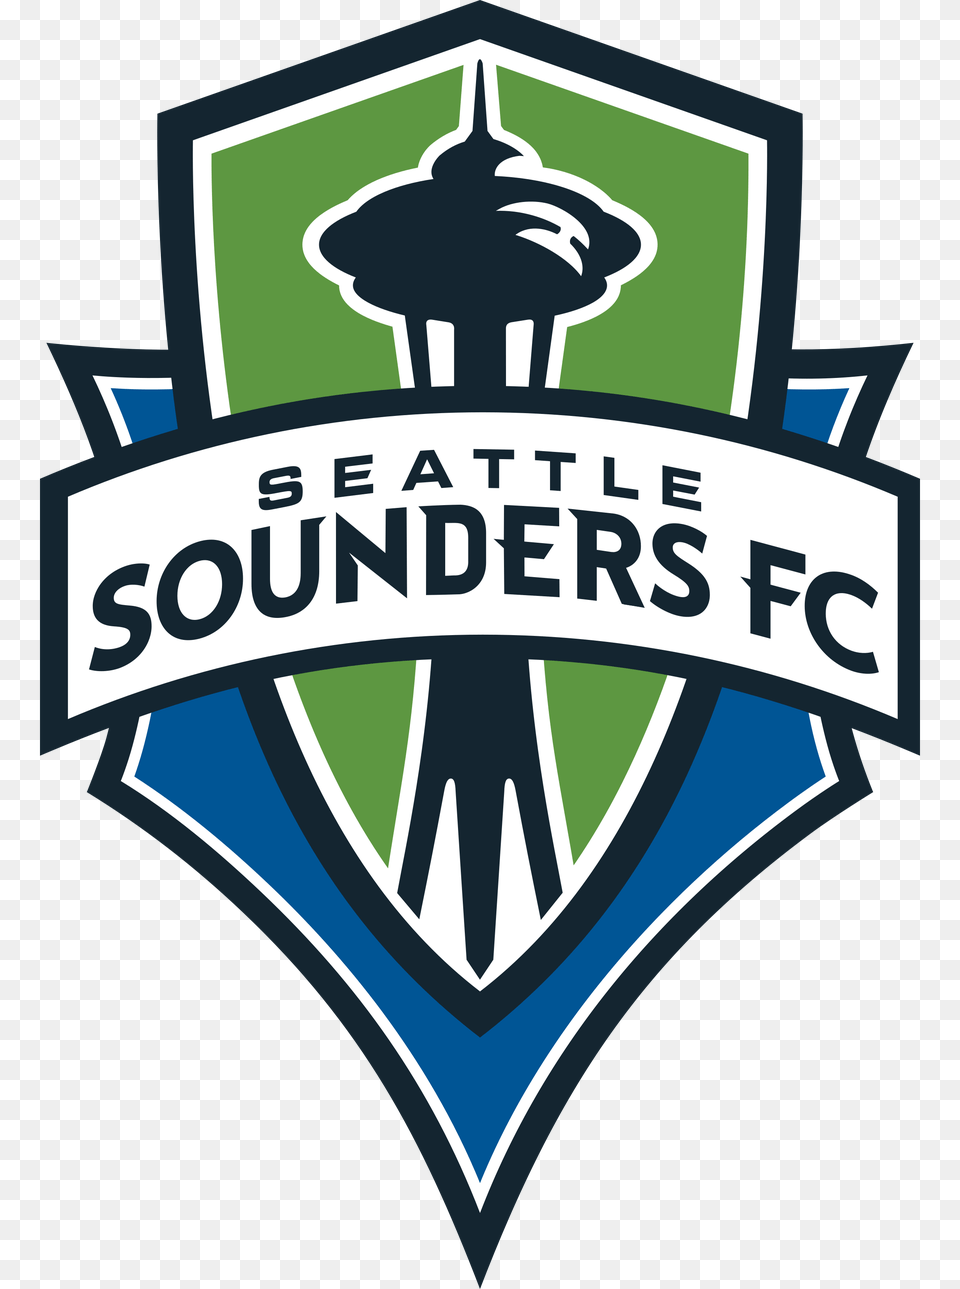 Single Game Tickets Seattle Sounders Fc Logo, Badge, Symbol, Gas Pump, Machine Png Image